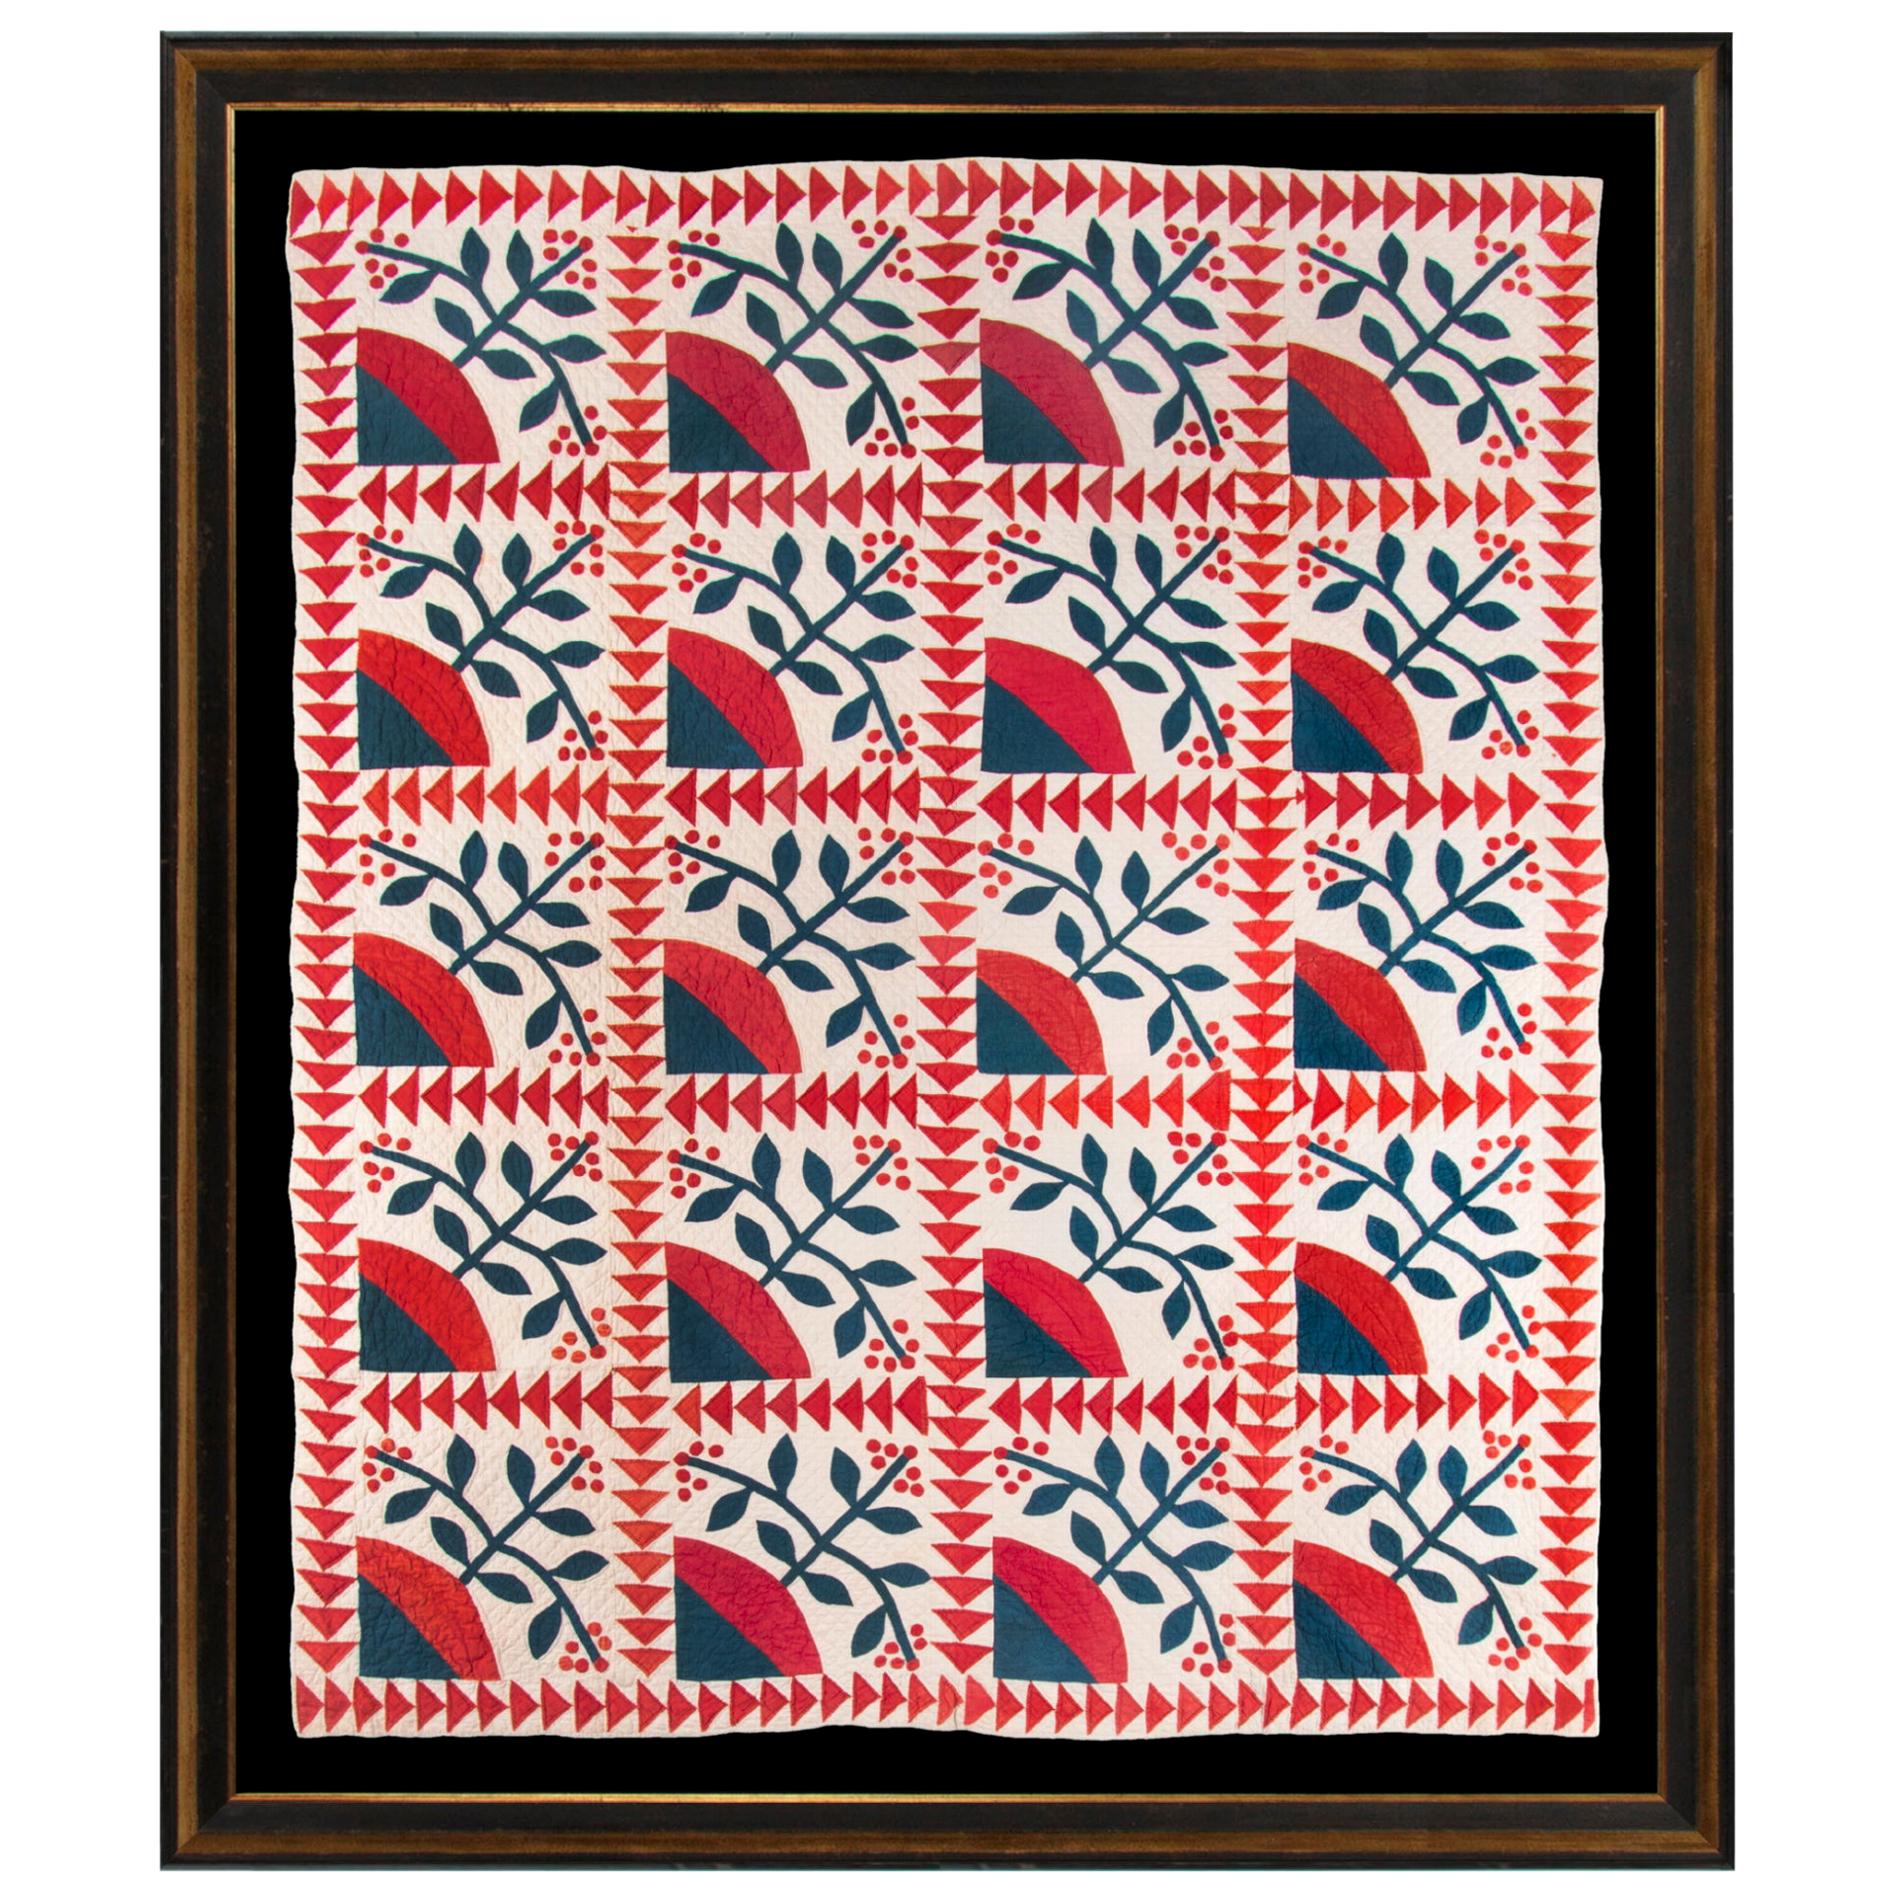 Winterberry and Flying Geese Pattern Quilt, circa 1860-1870